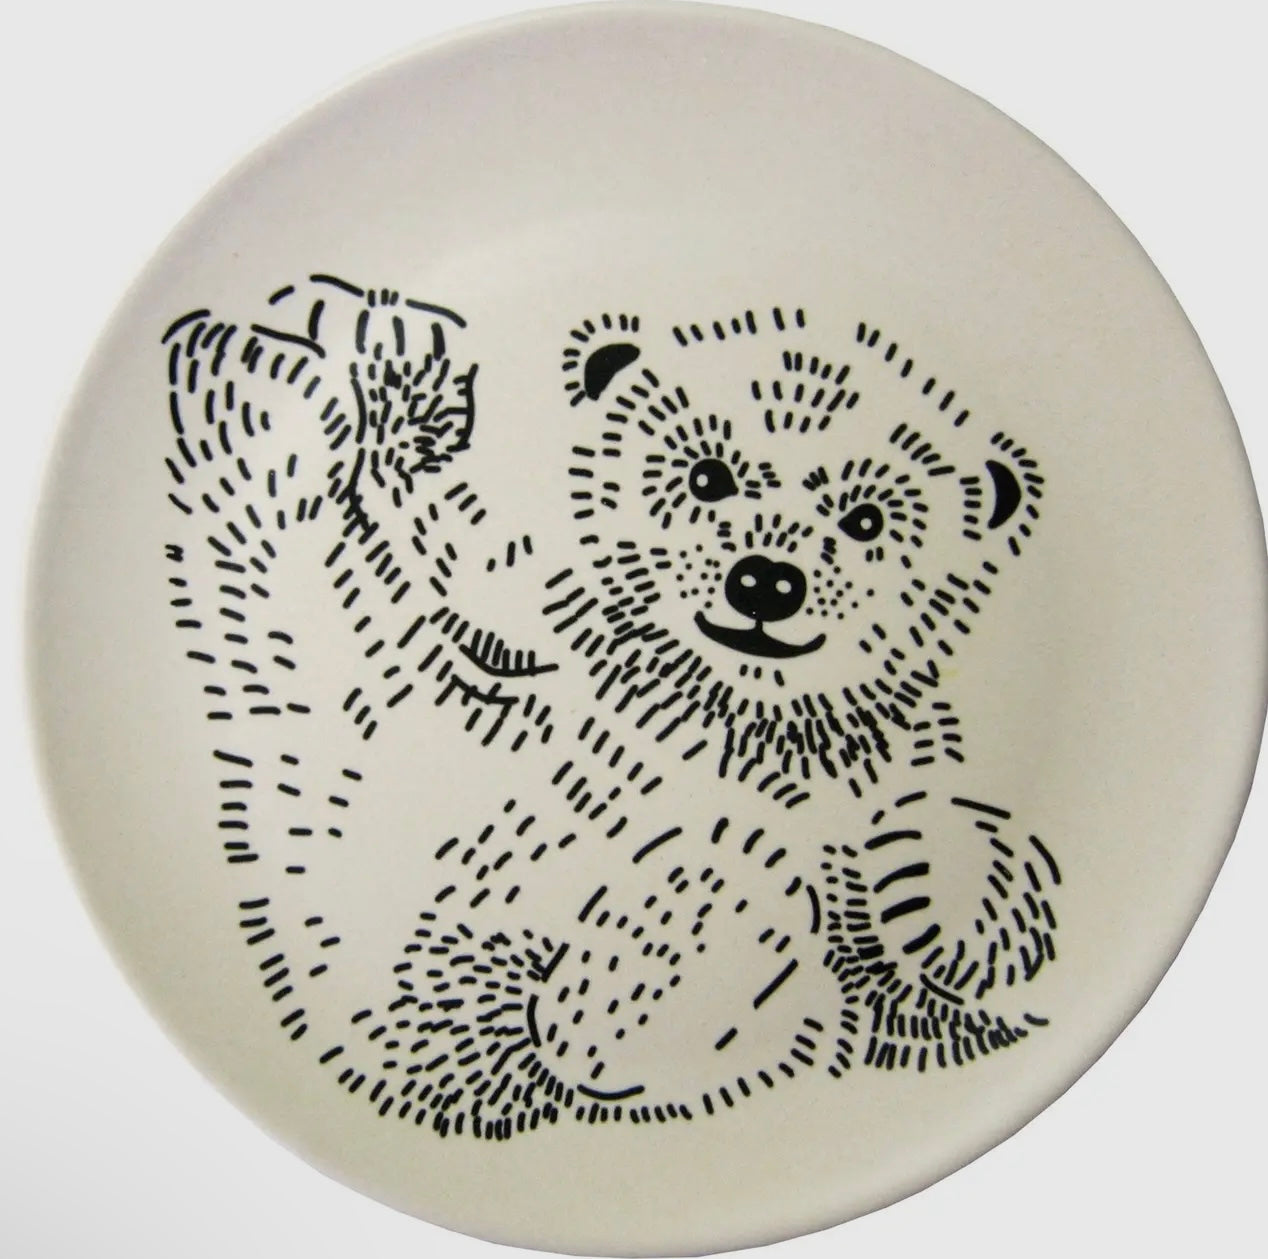 Children's plate with lying bear design - perfect for meals and snacks